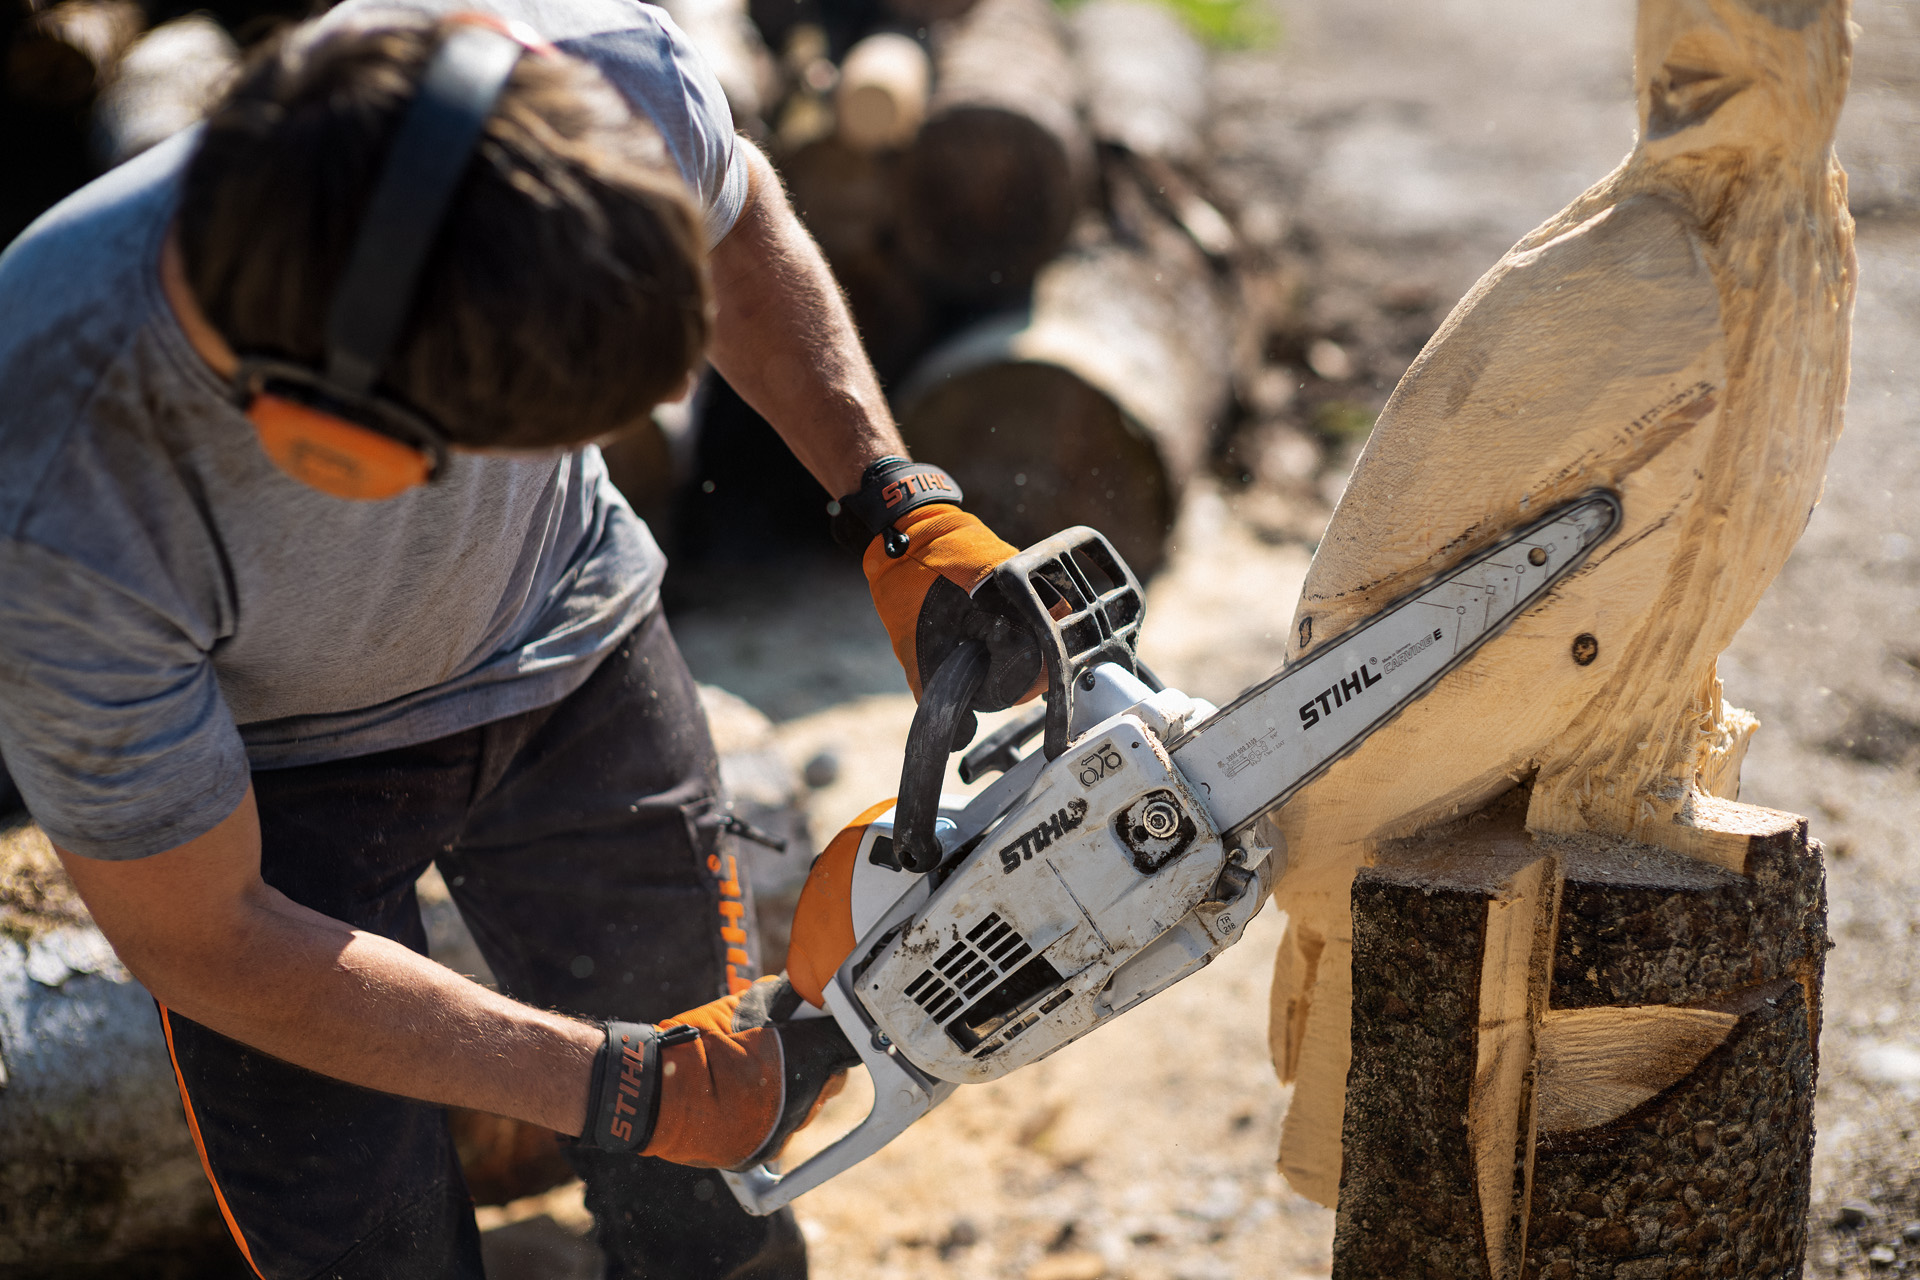 A man wearing ear protection and gloves uses a STIHL MS 193 C-E carving chainsaw to work on a partly finished wooden sculpture of a bird